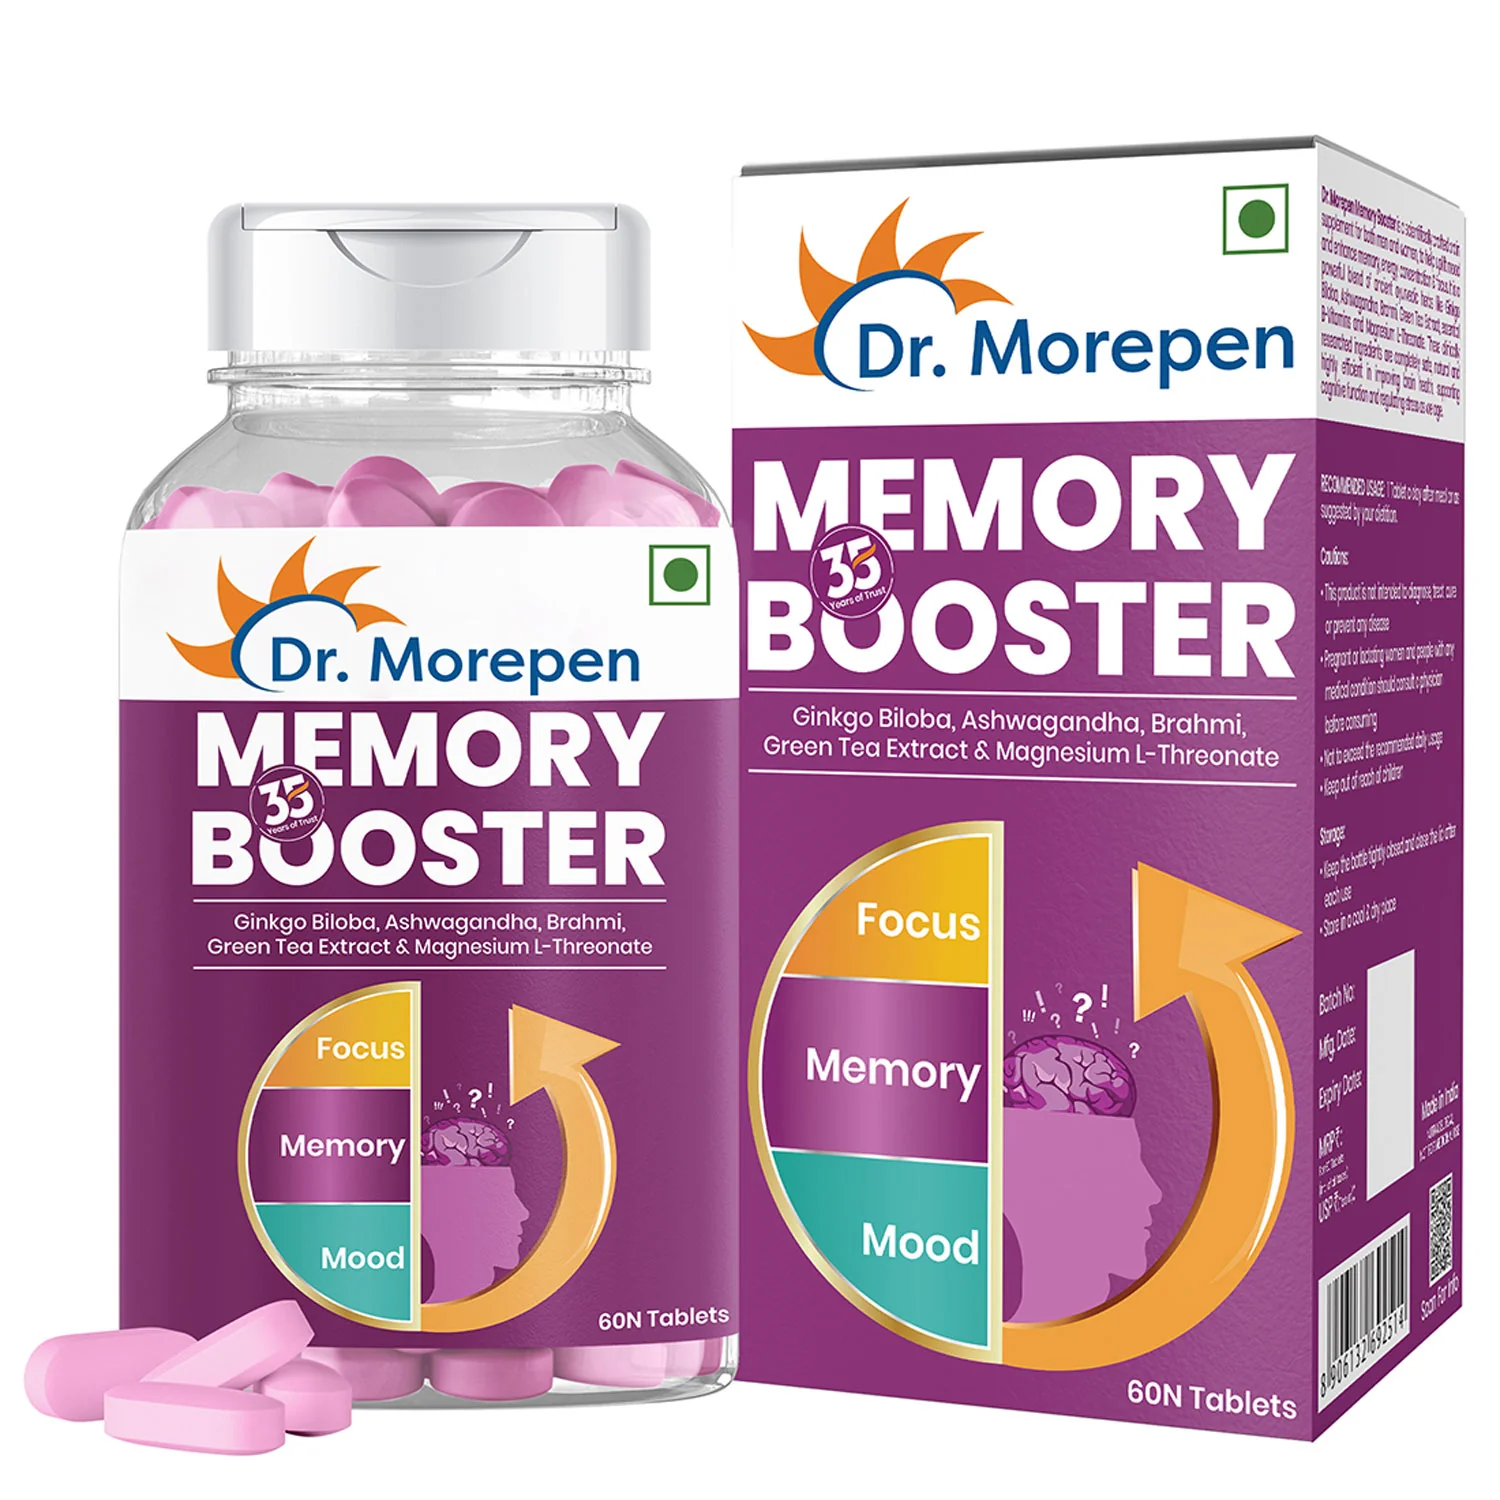 Dr. Morepen Memory Booster | With Gingko & Brahmi for Focus, Memory & Mood | Tablet